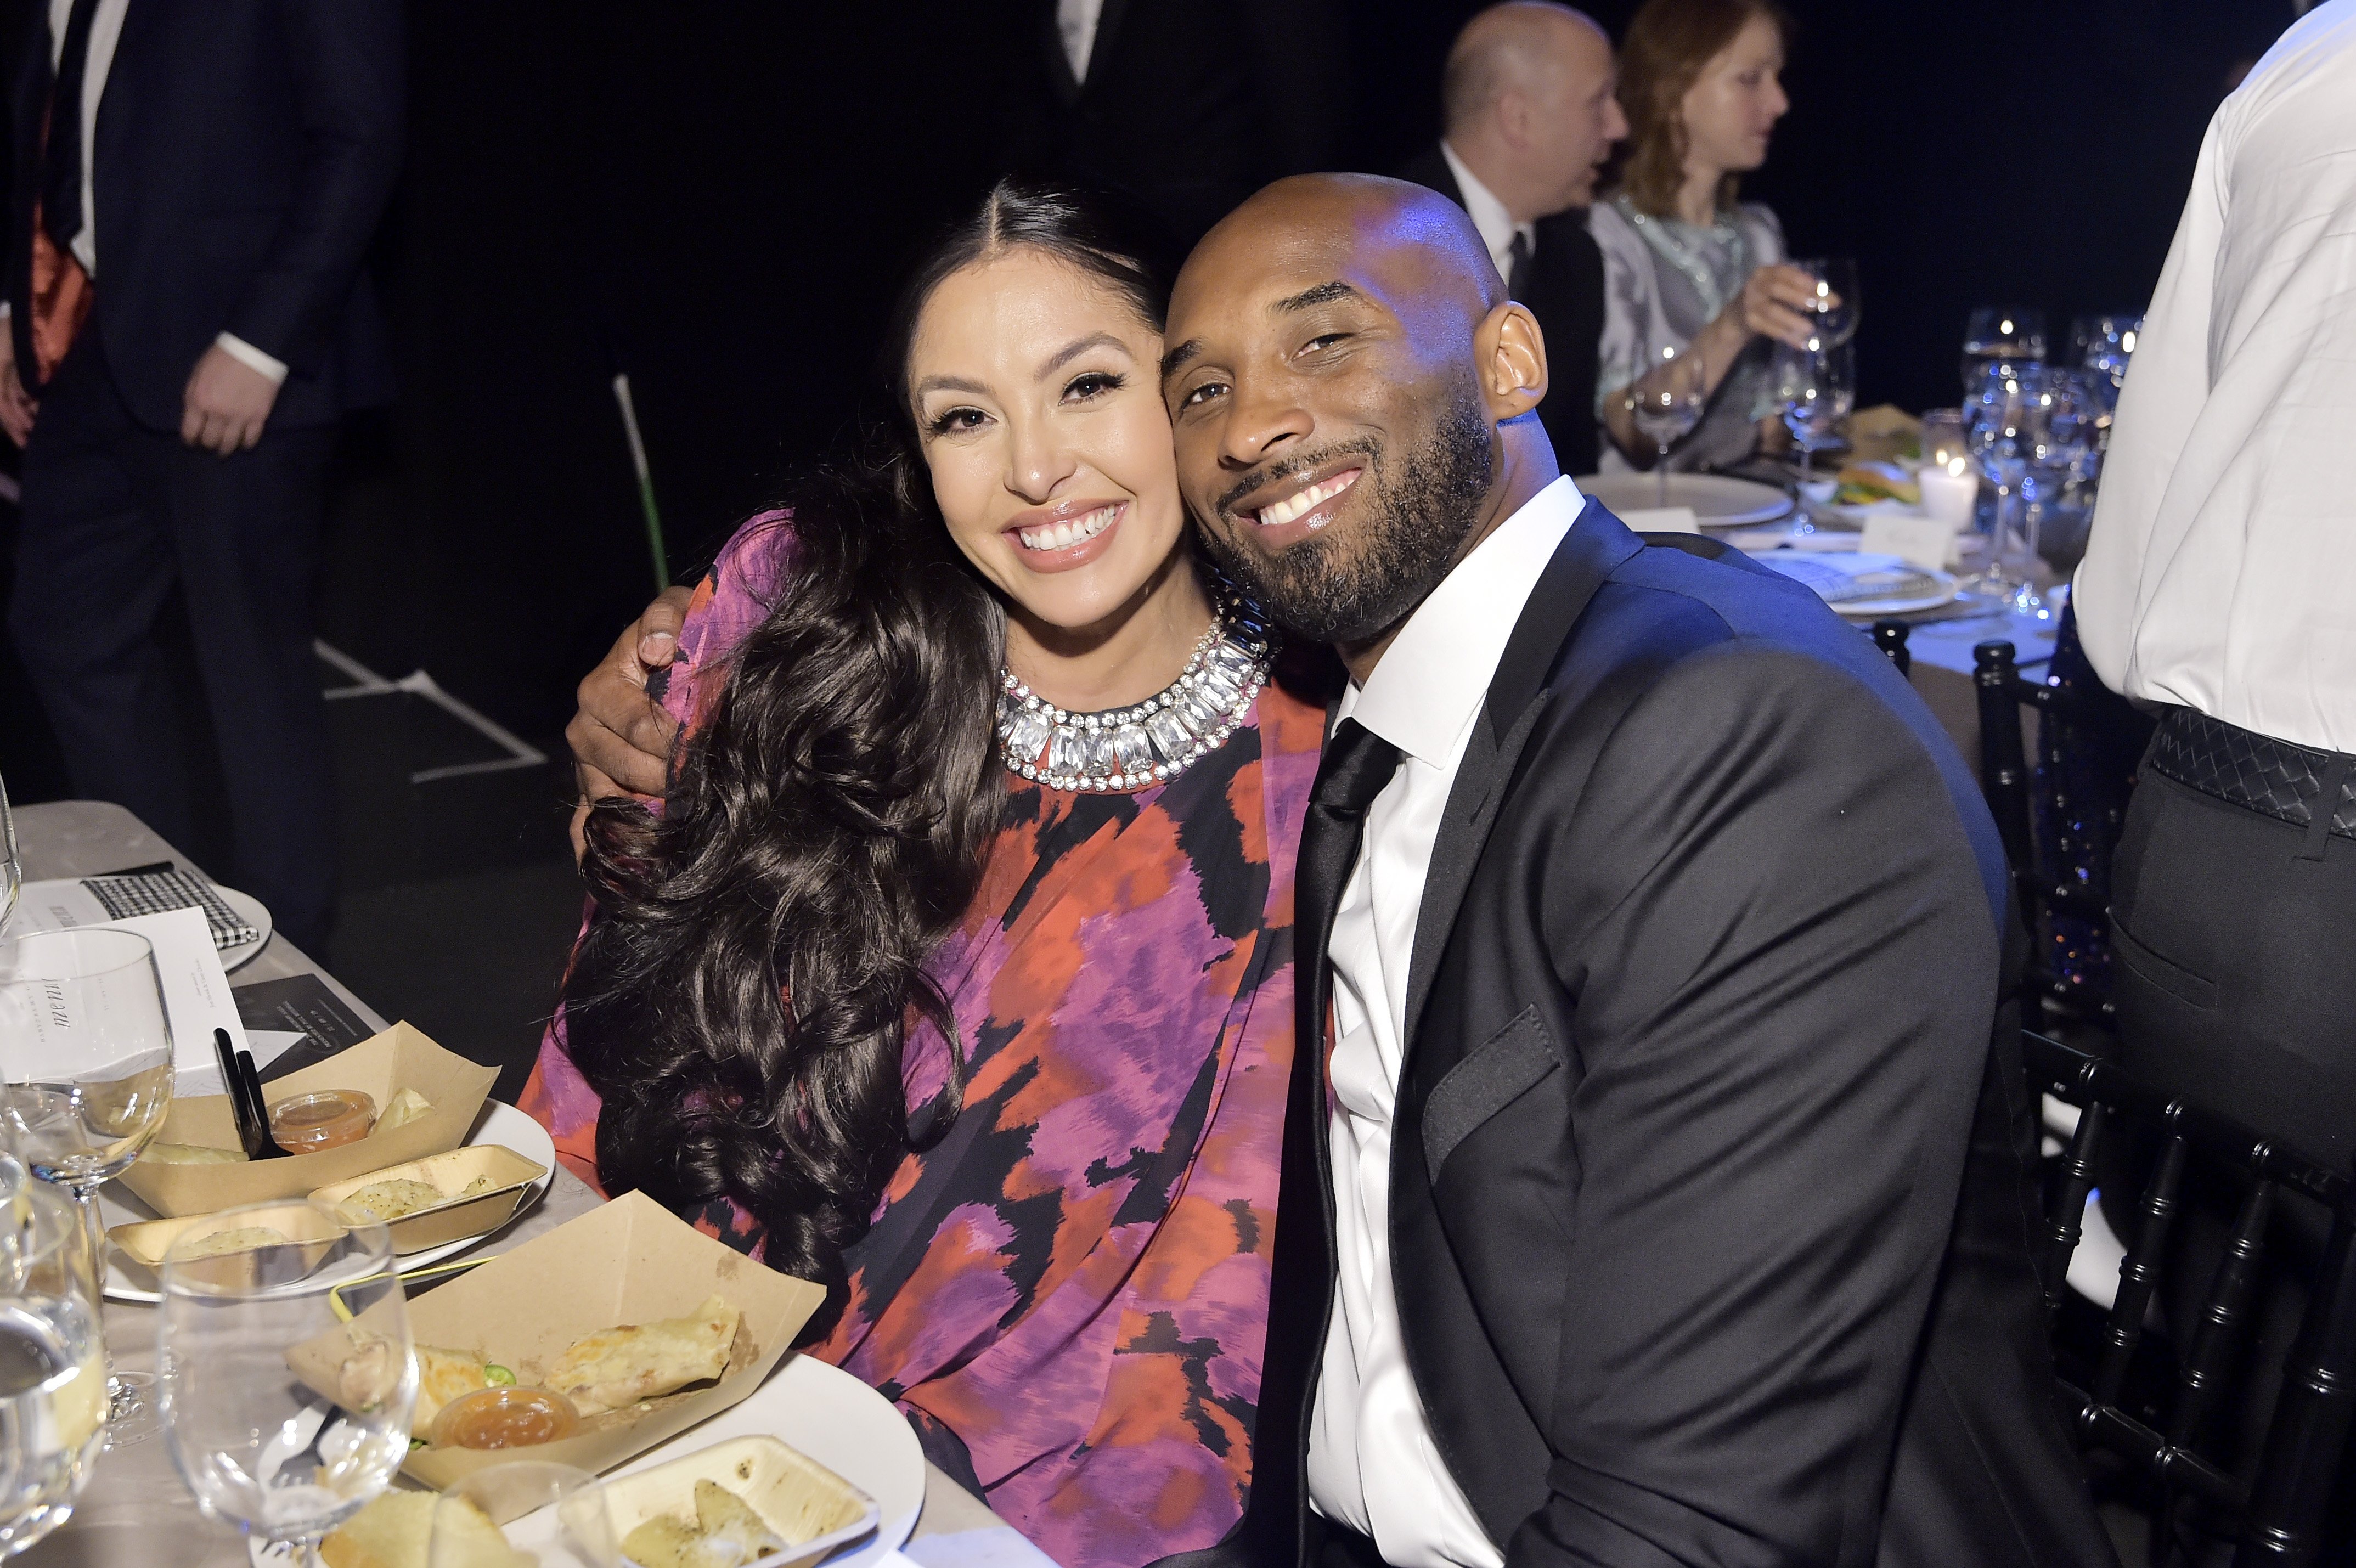 Vanessa Laine Bryant and Kobe Bryant attend the 2019 Baby2Baby Gala on November 09, 2019. | Photo: Getty Images